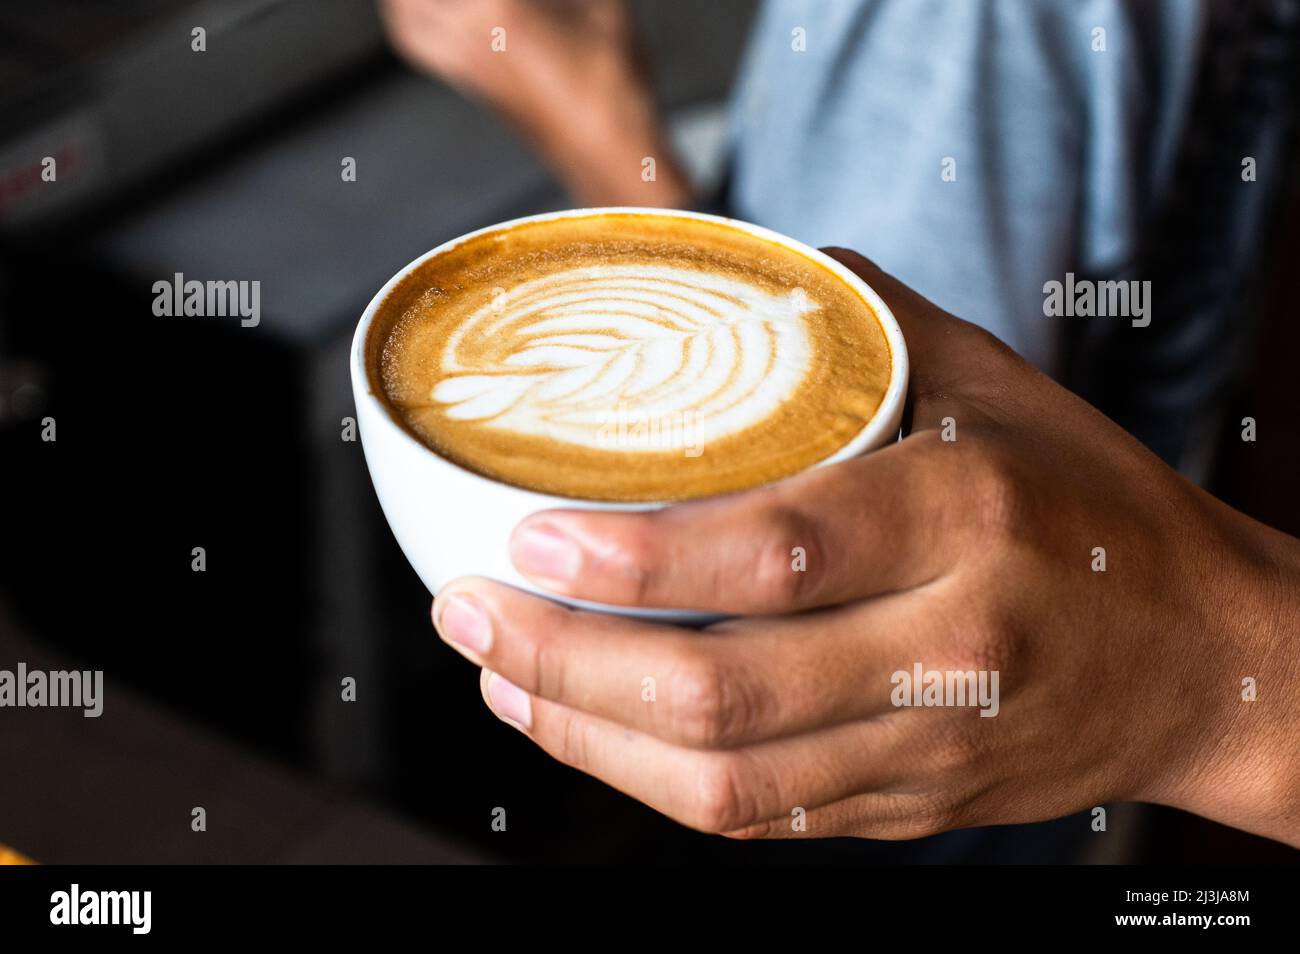 Barista pouring milk making a coffee latte art. People pour milk to making latte art coffee at cafe or coffee shop Stock Photo